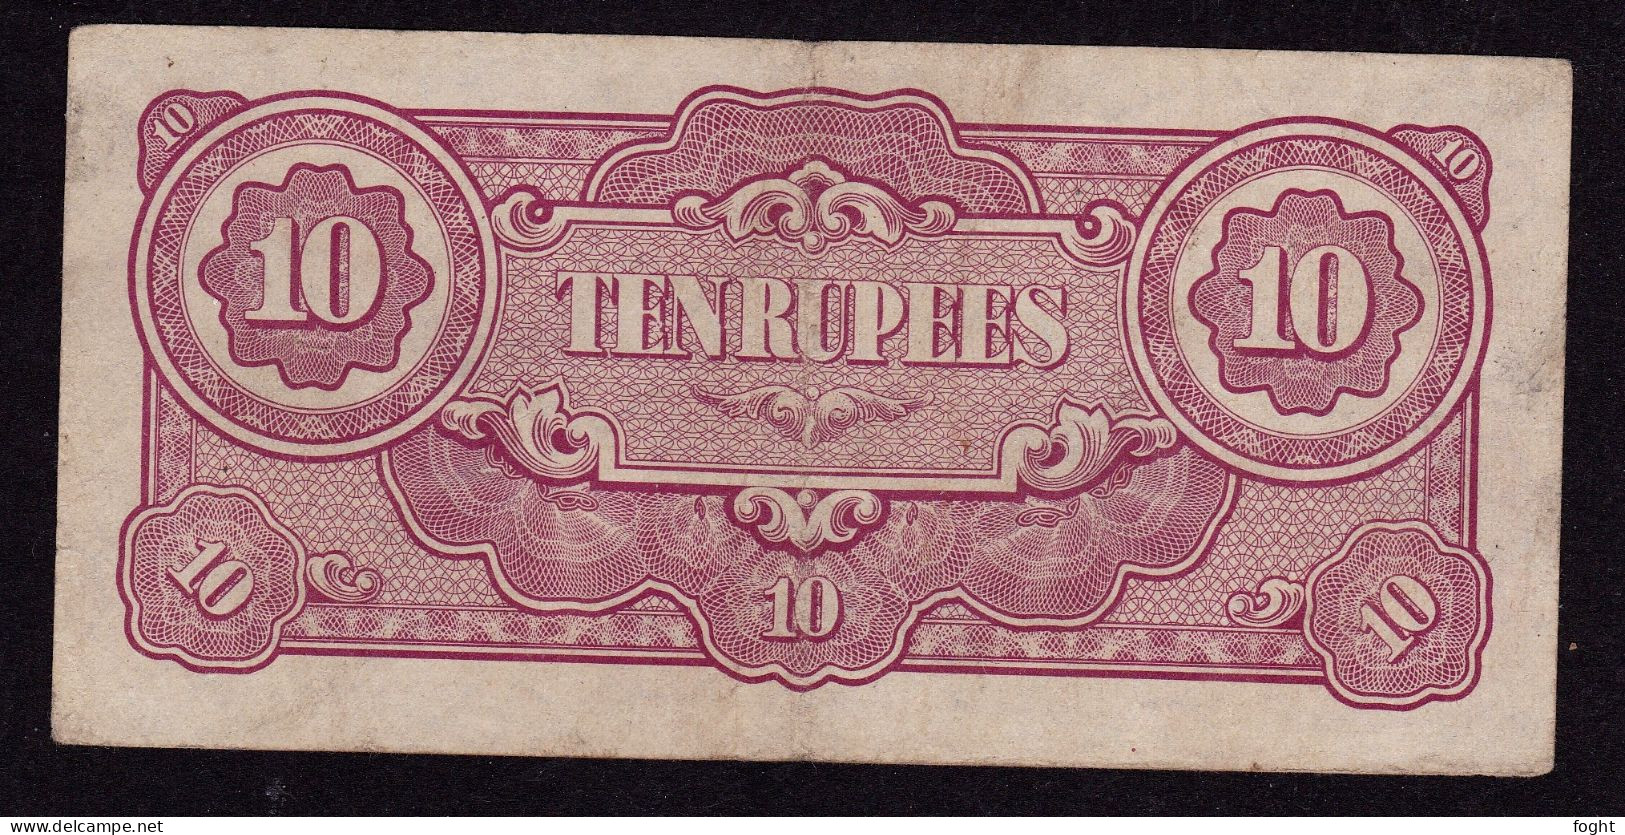 Japanese Government (Burma) Ten (10) Rupees Note - From 1942-45 (WWII) - Japan